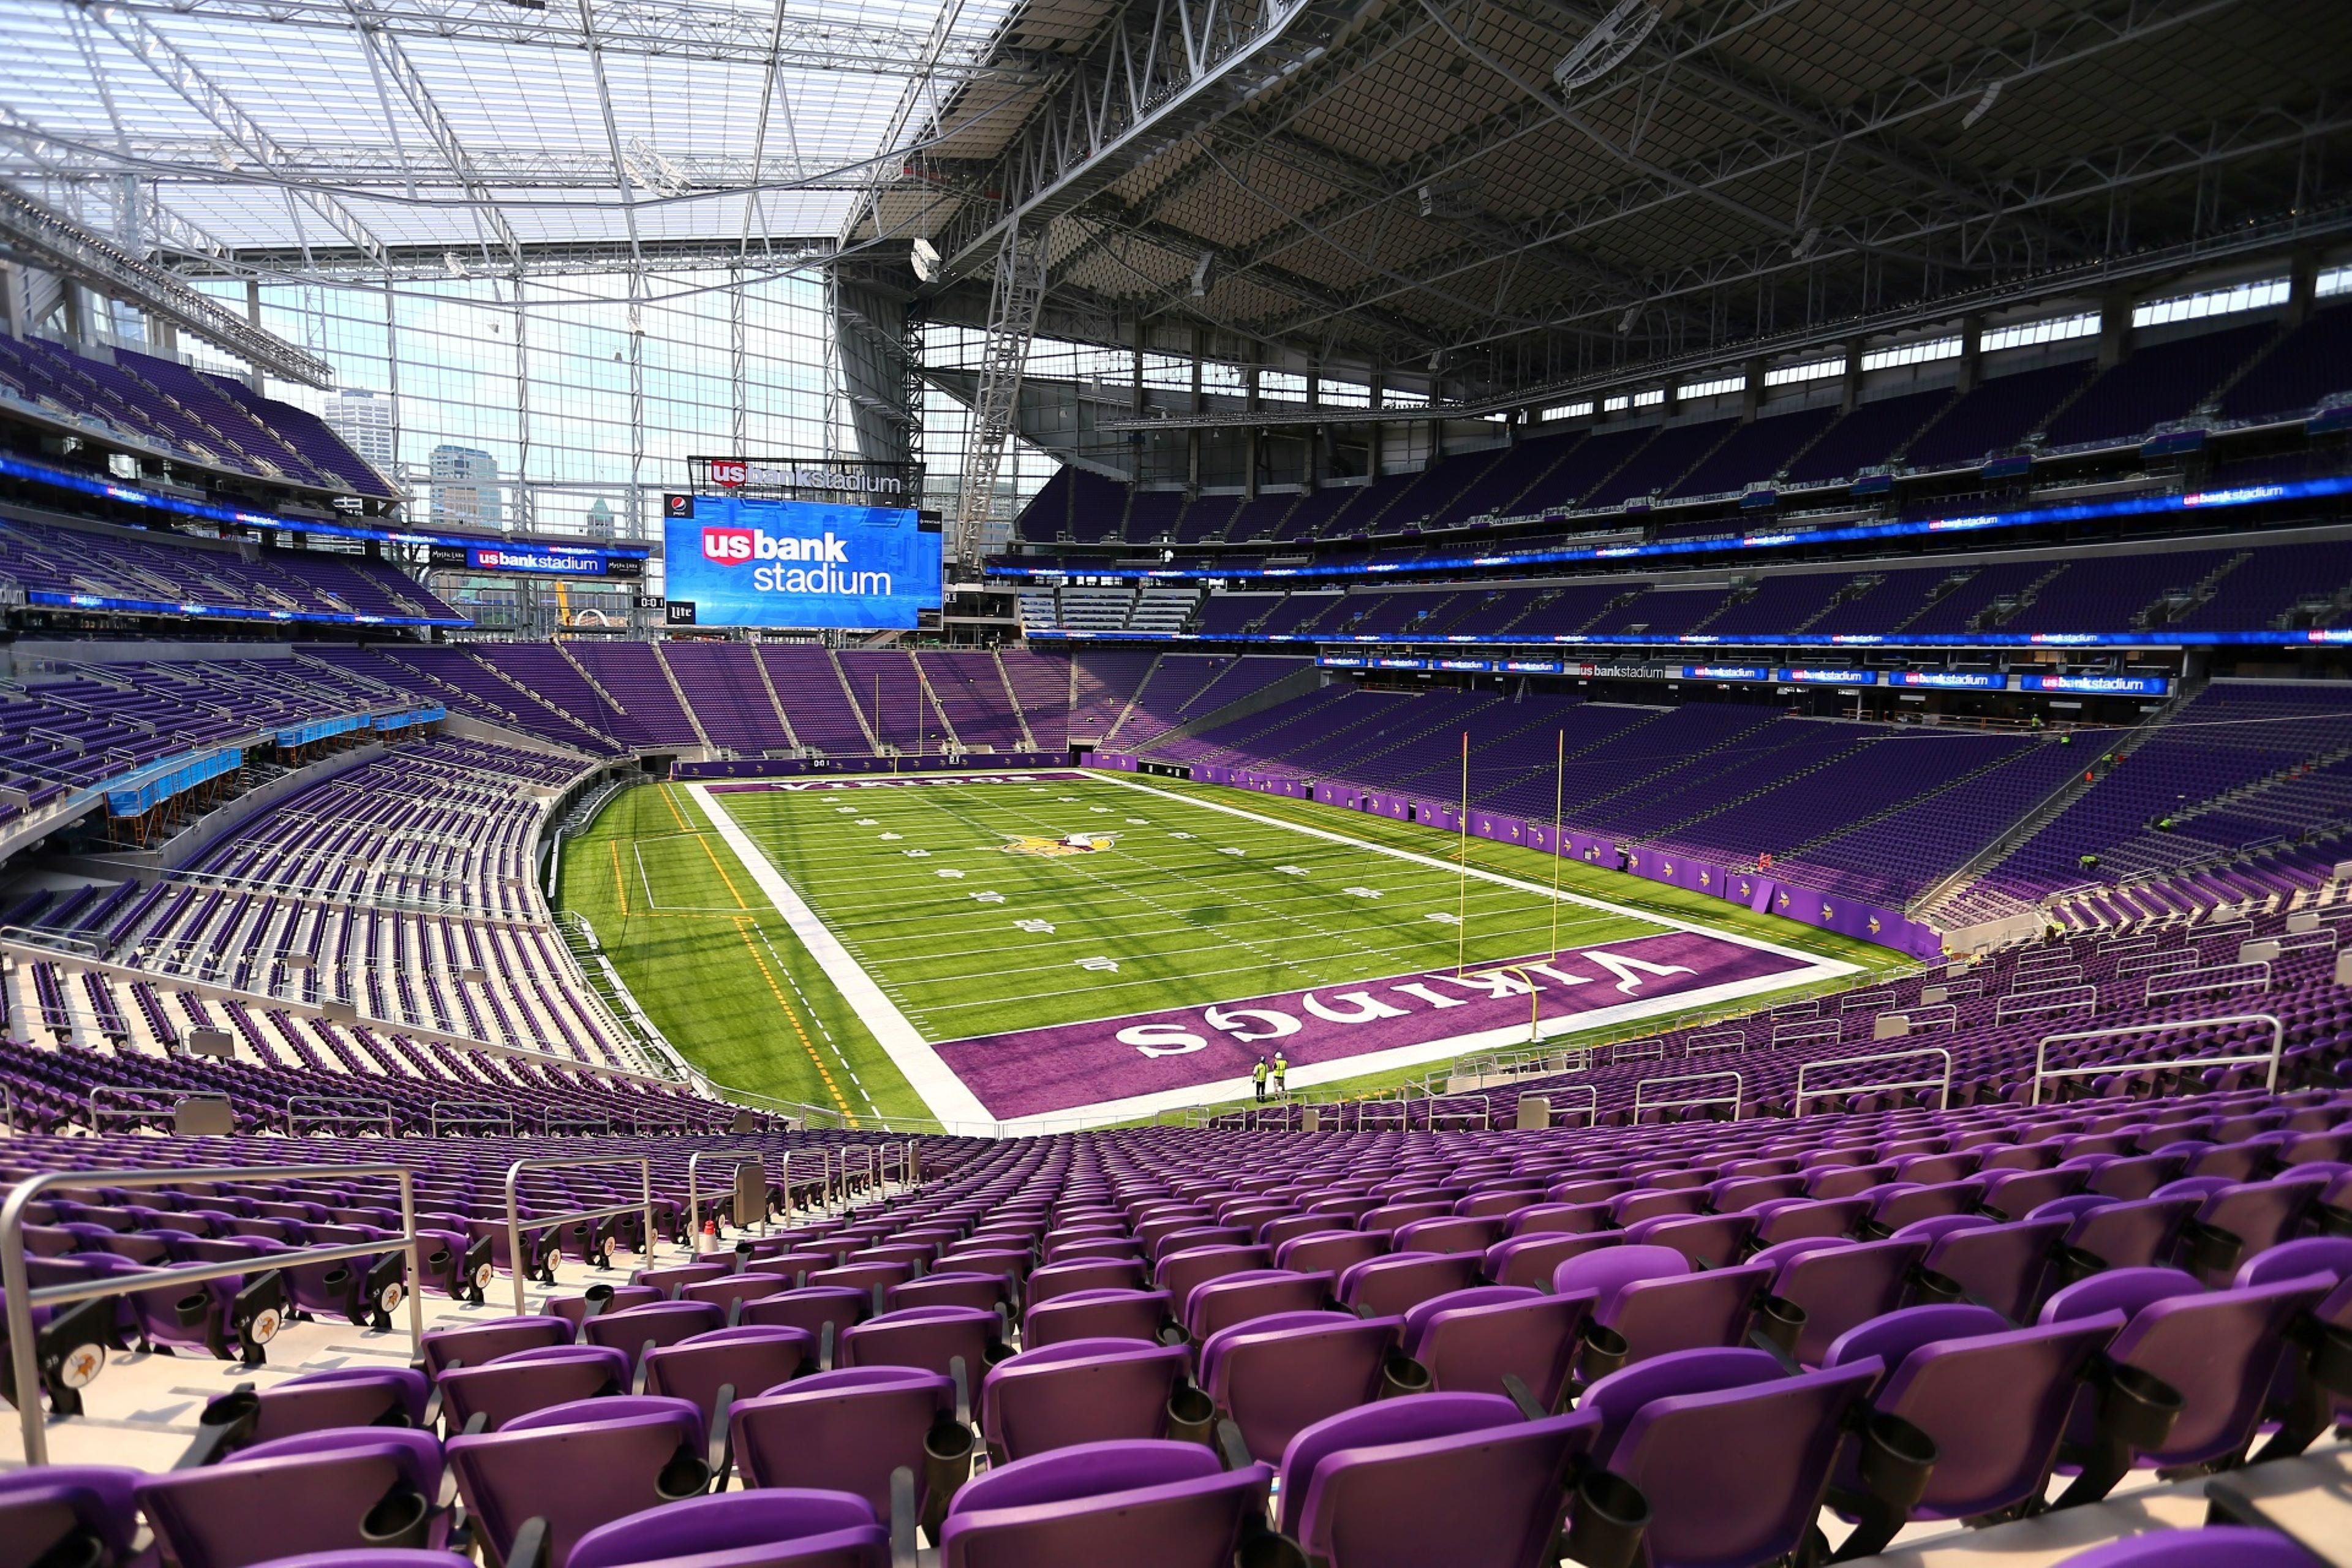 Minneapolis is home to major sporting events as well as the iconic Minneapolis Convention Center, which hosts trade shows and dance competitions. Stay near Target Center - where the Timberwolves and Lynx play - U.S. Bank Stadium - home of the Minnesota Vikings, and Target Field - home of the Twins, and catch all the action! 